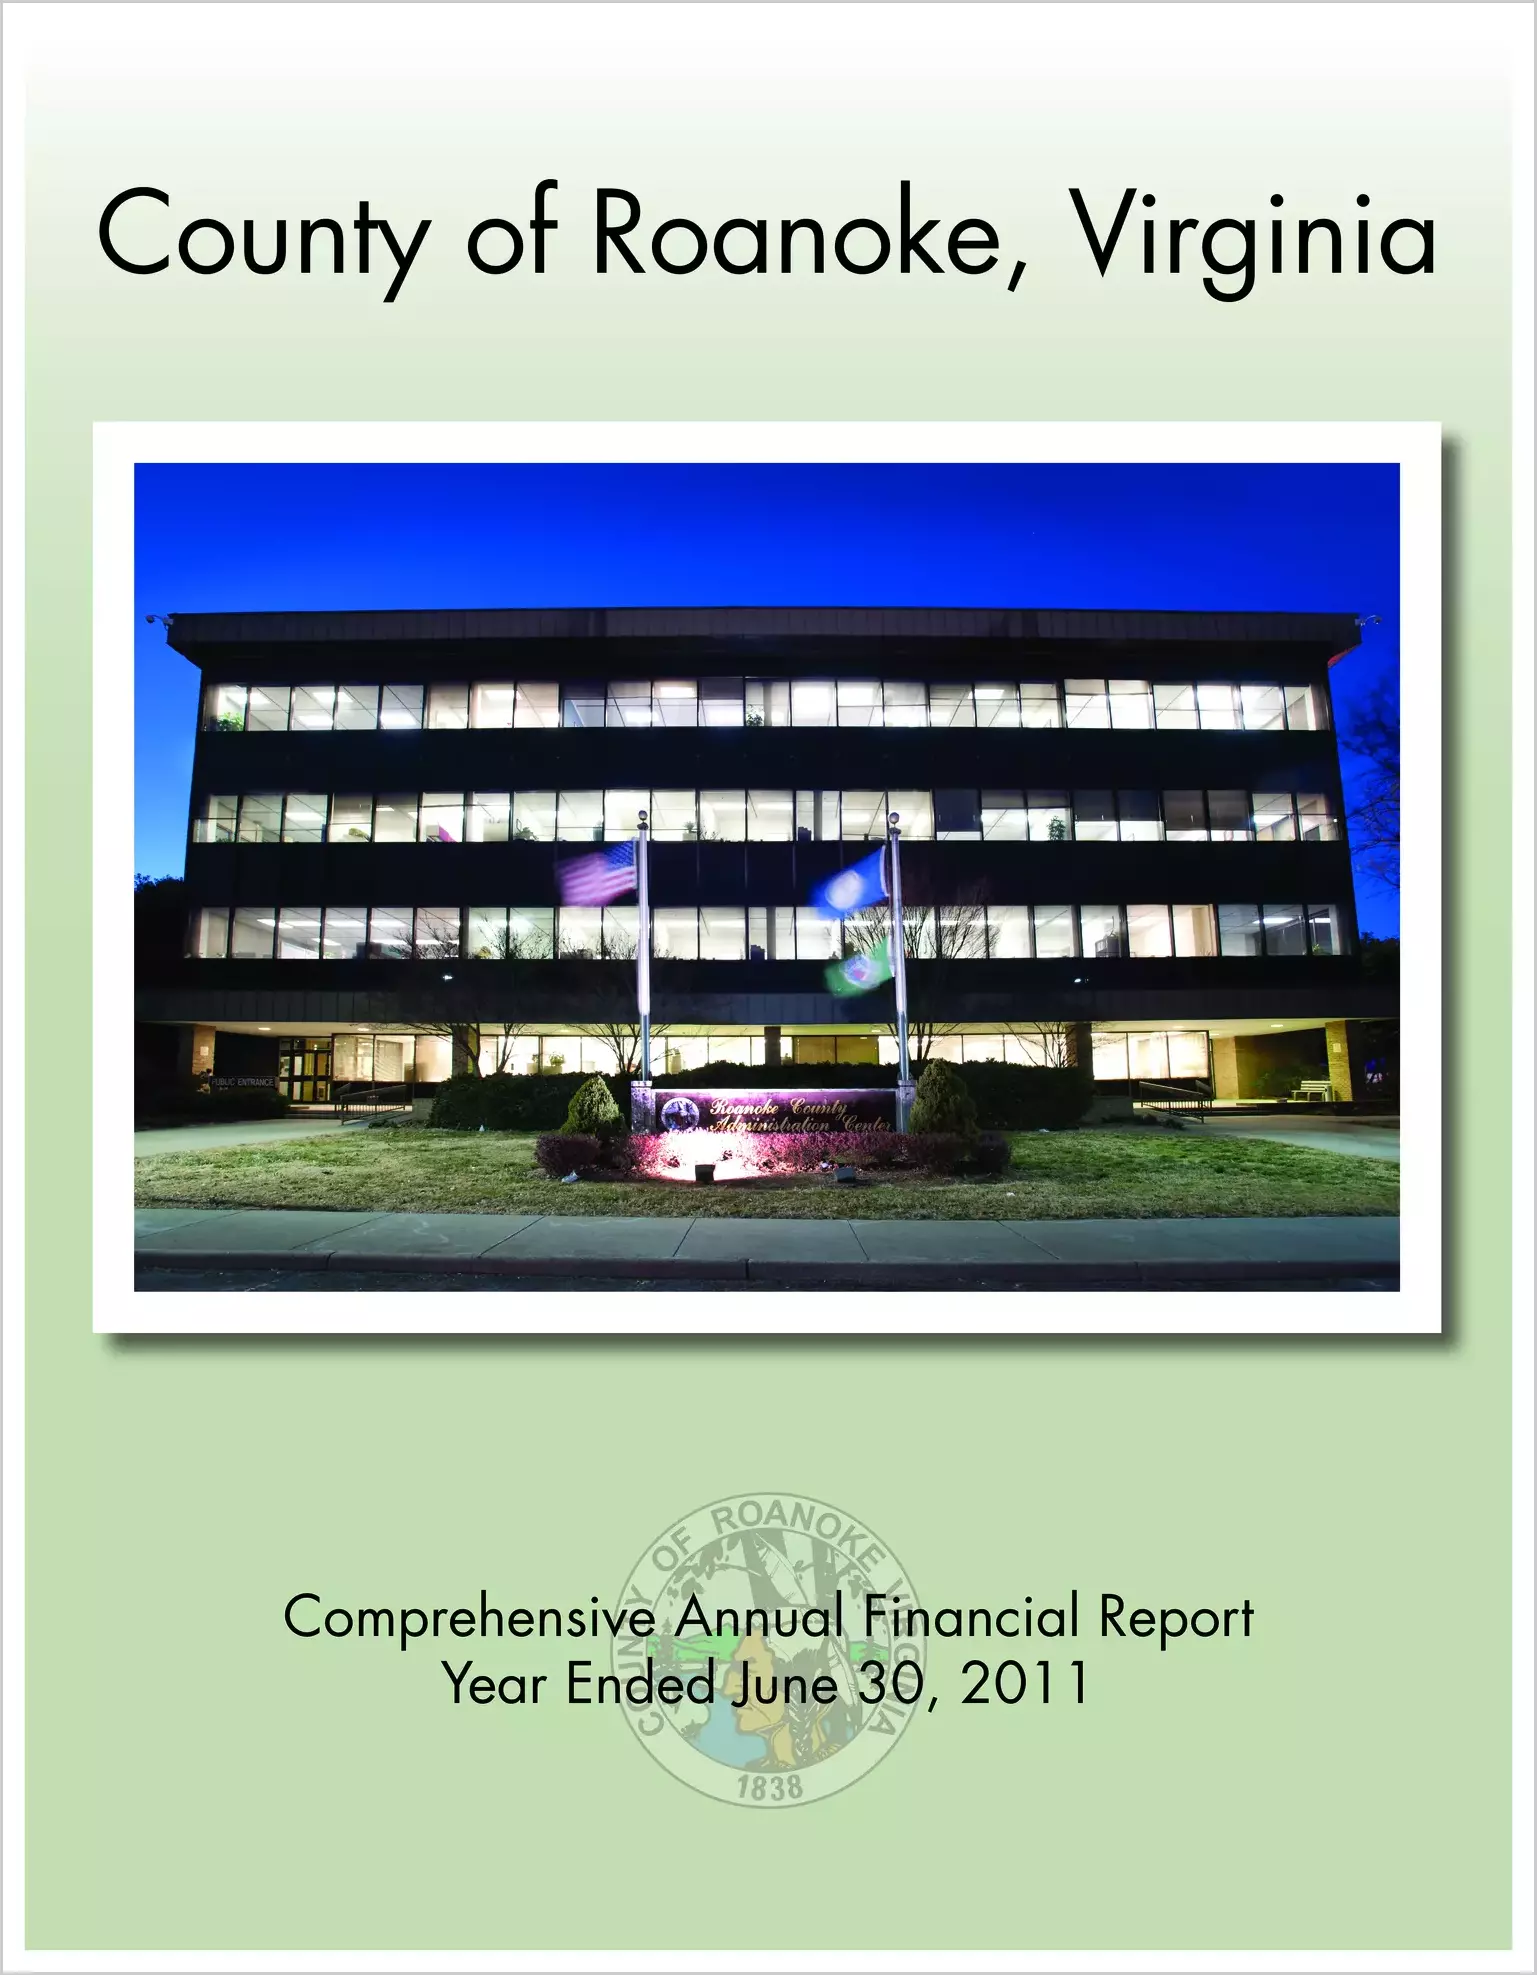 2011 Annual Financial Report for County of Roanoke